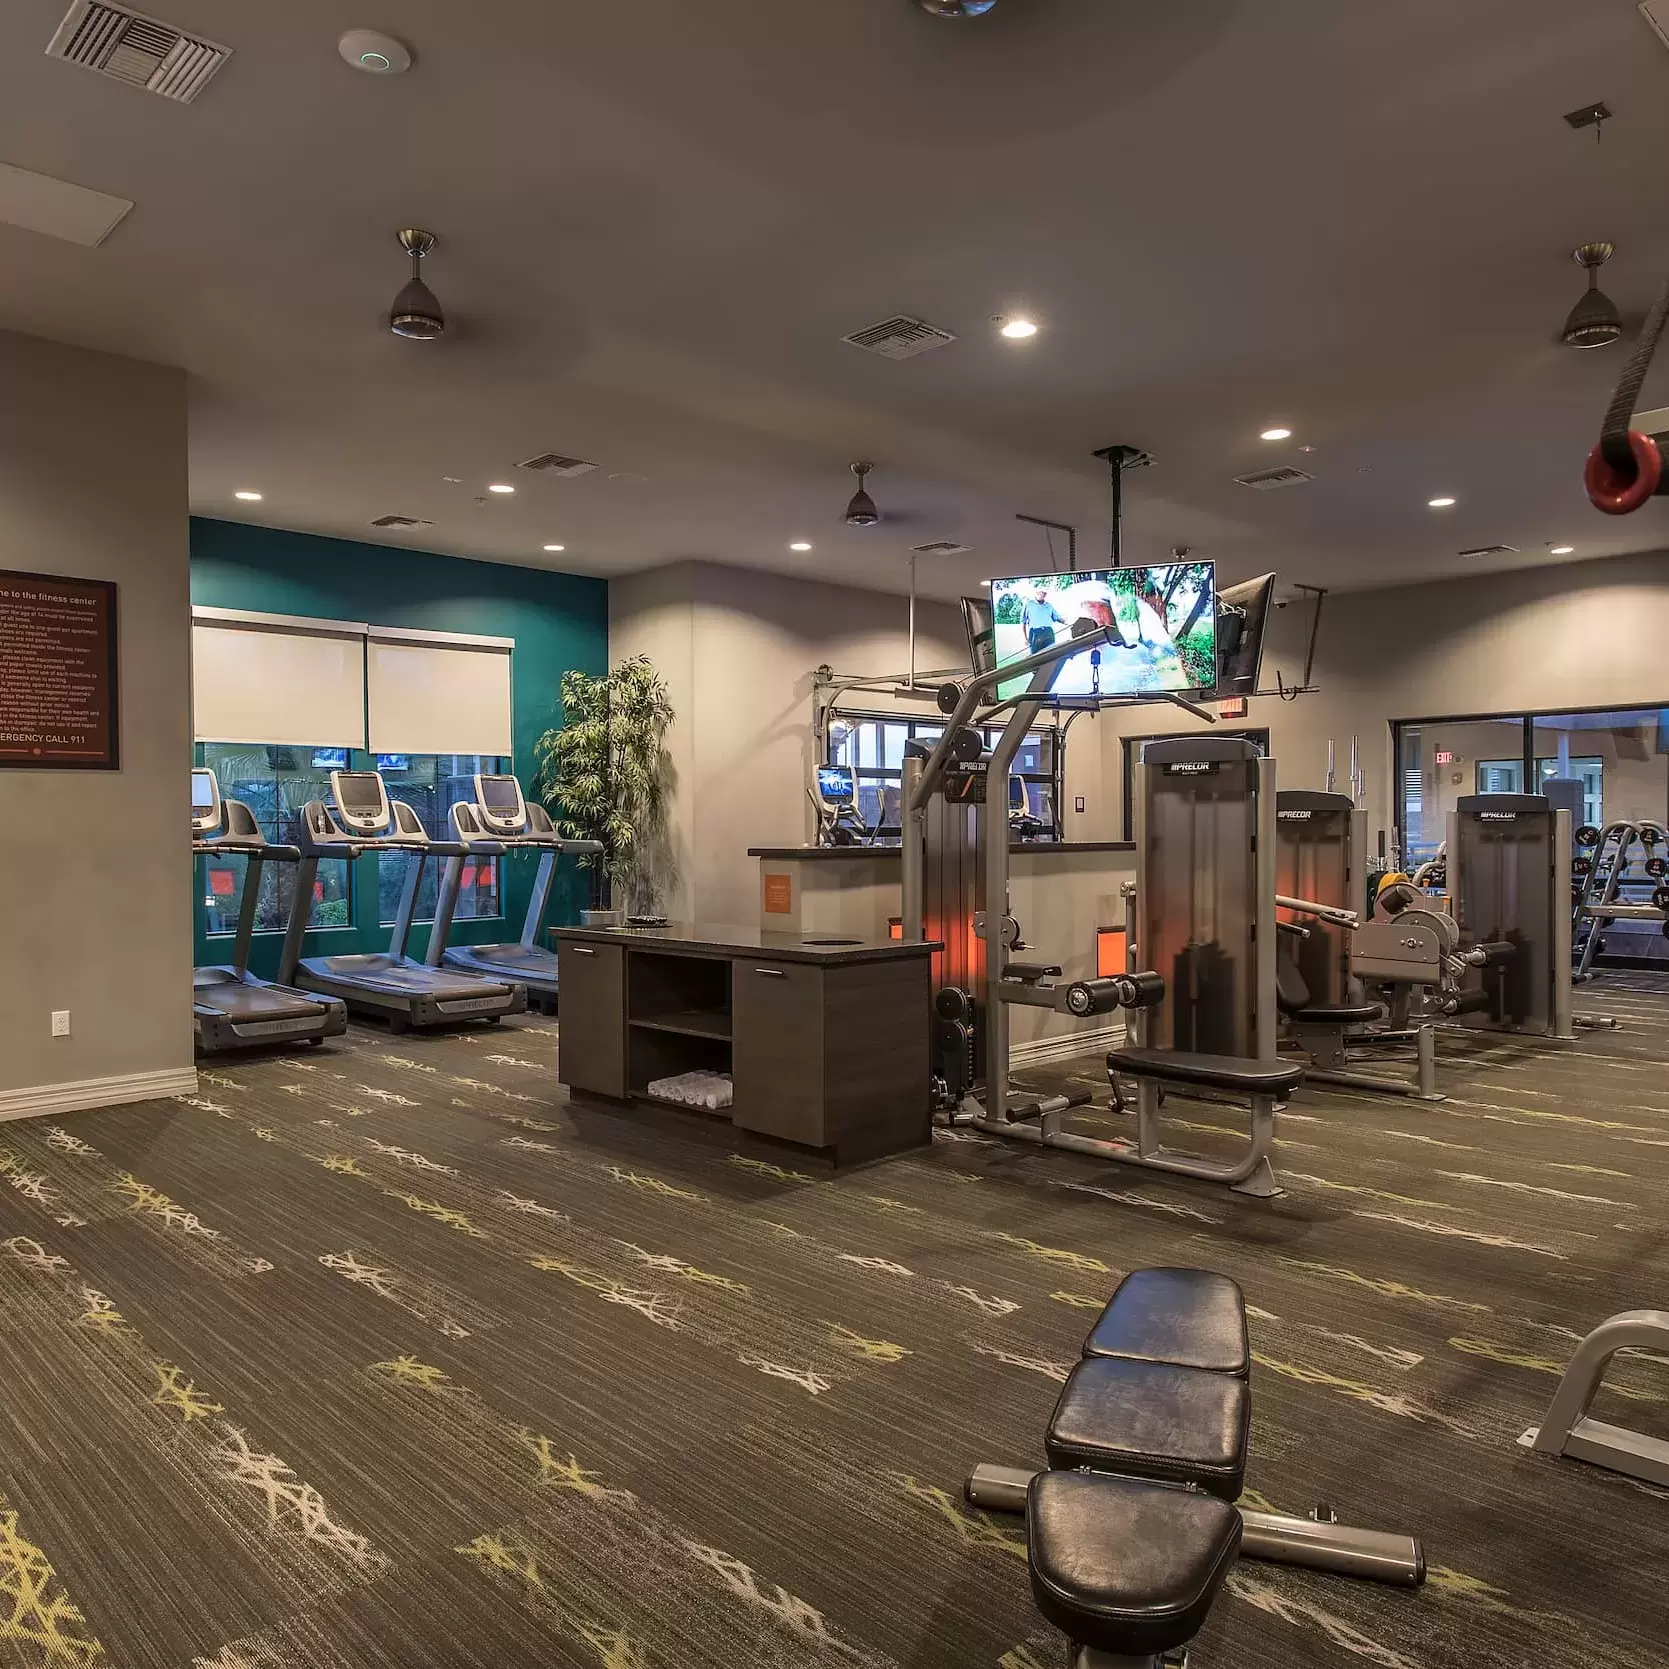 The fitness center, with exercise equipment and treadmills for healthy living.